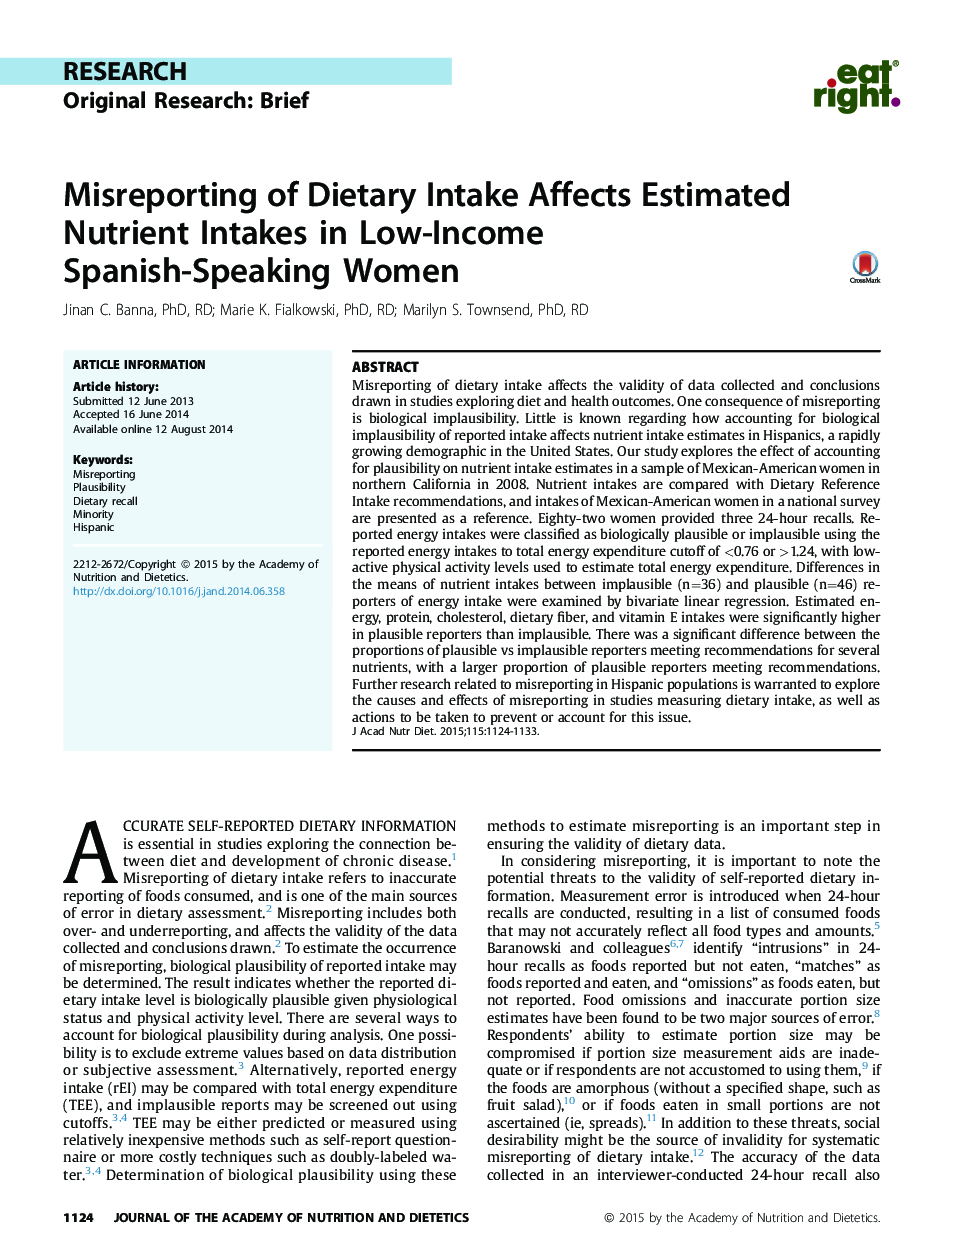 Misreporting of Dietary Intake Affects Estimated Nutrient Intakes in Low-Income Spanish-Speaking Women 